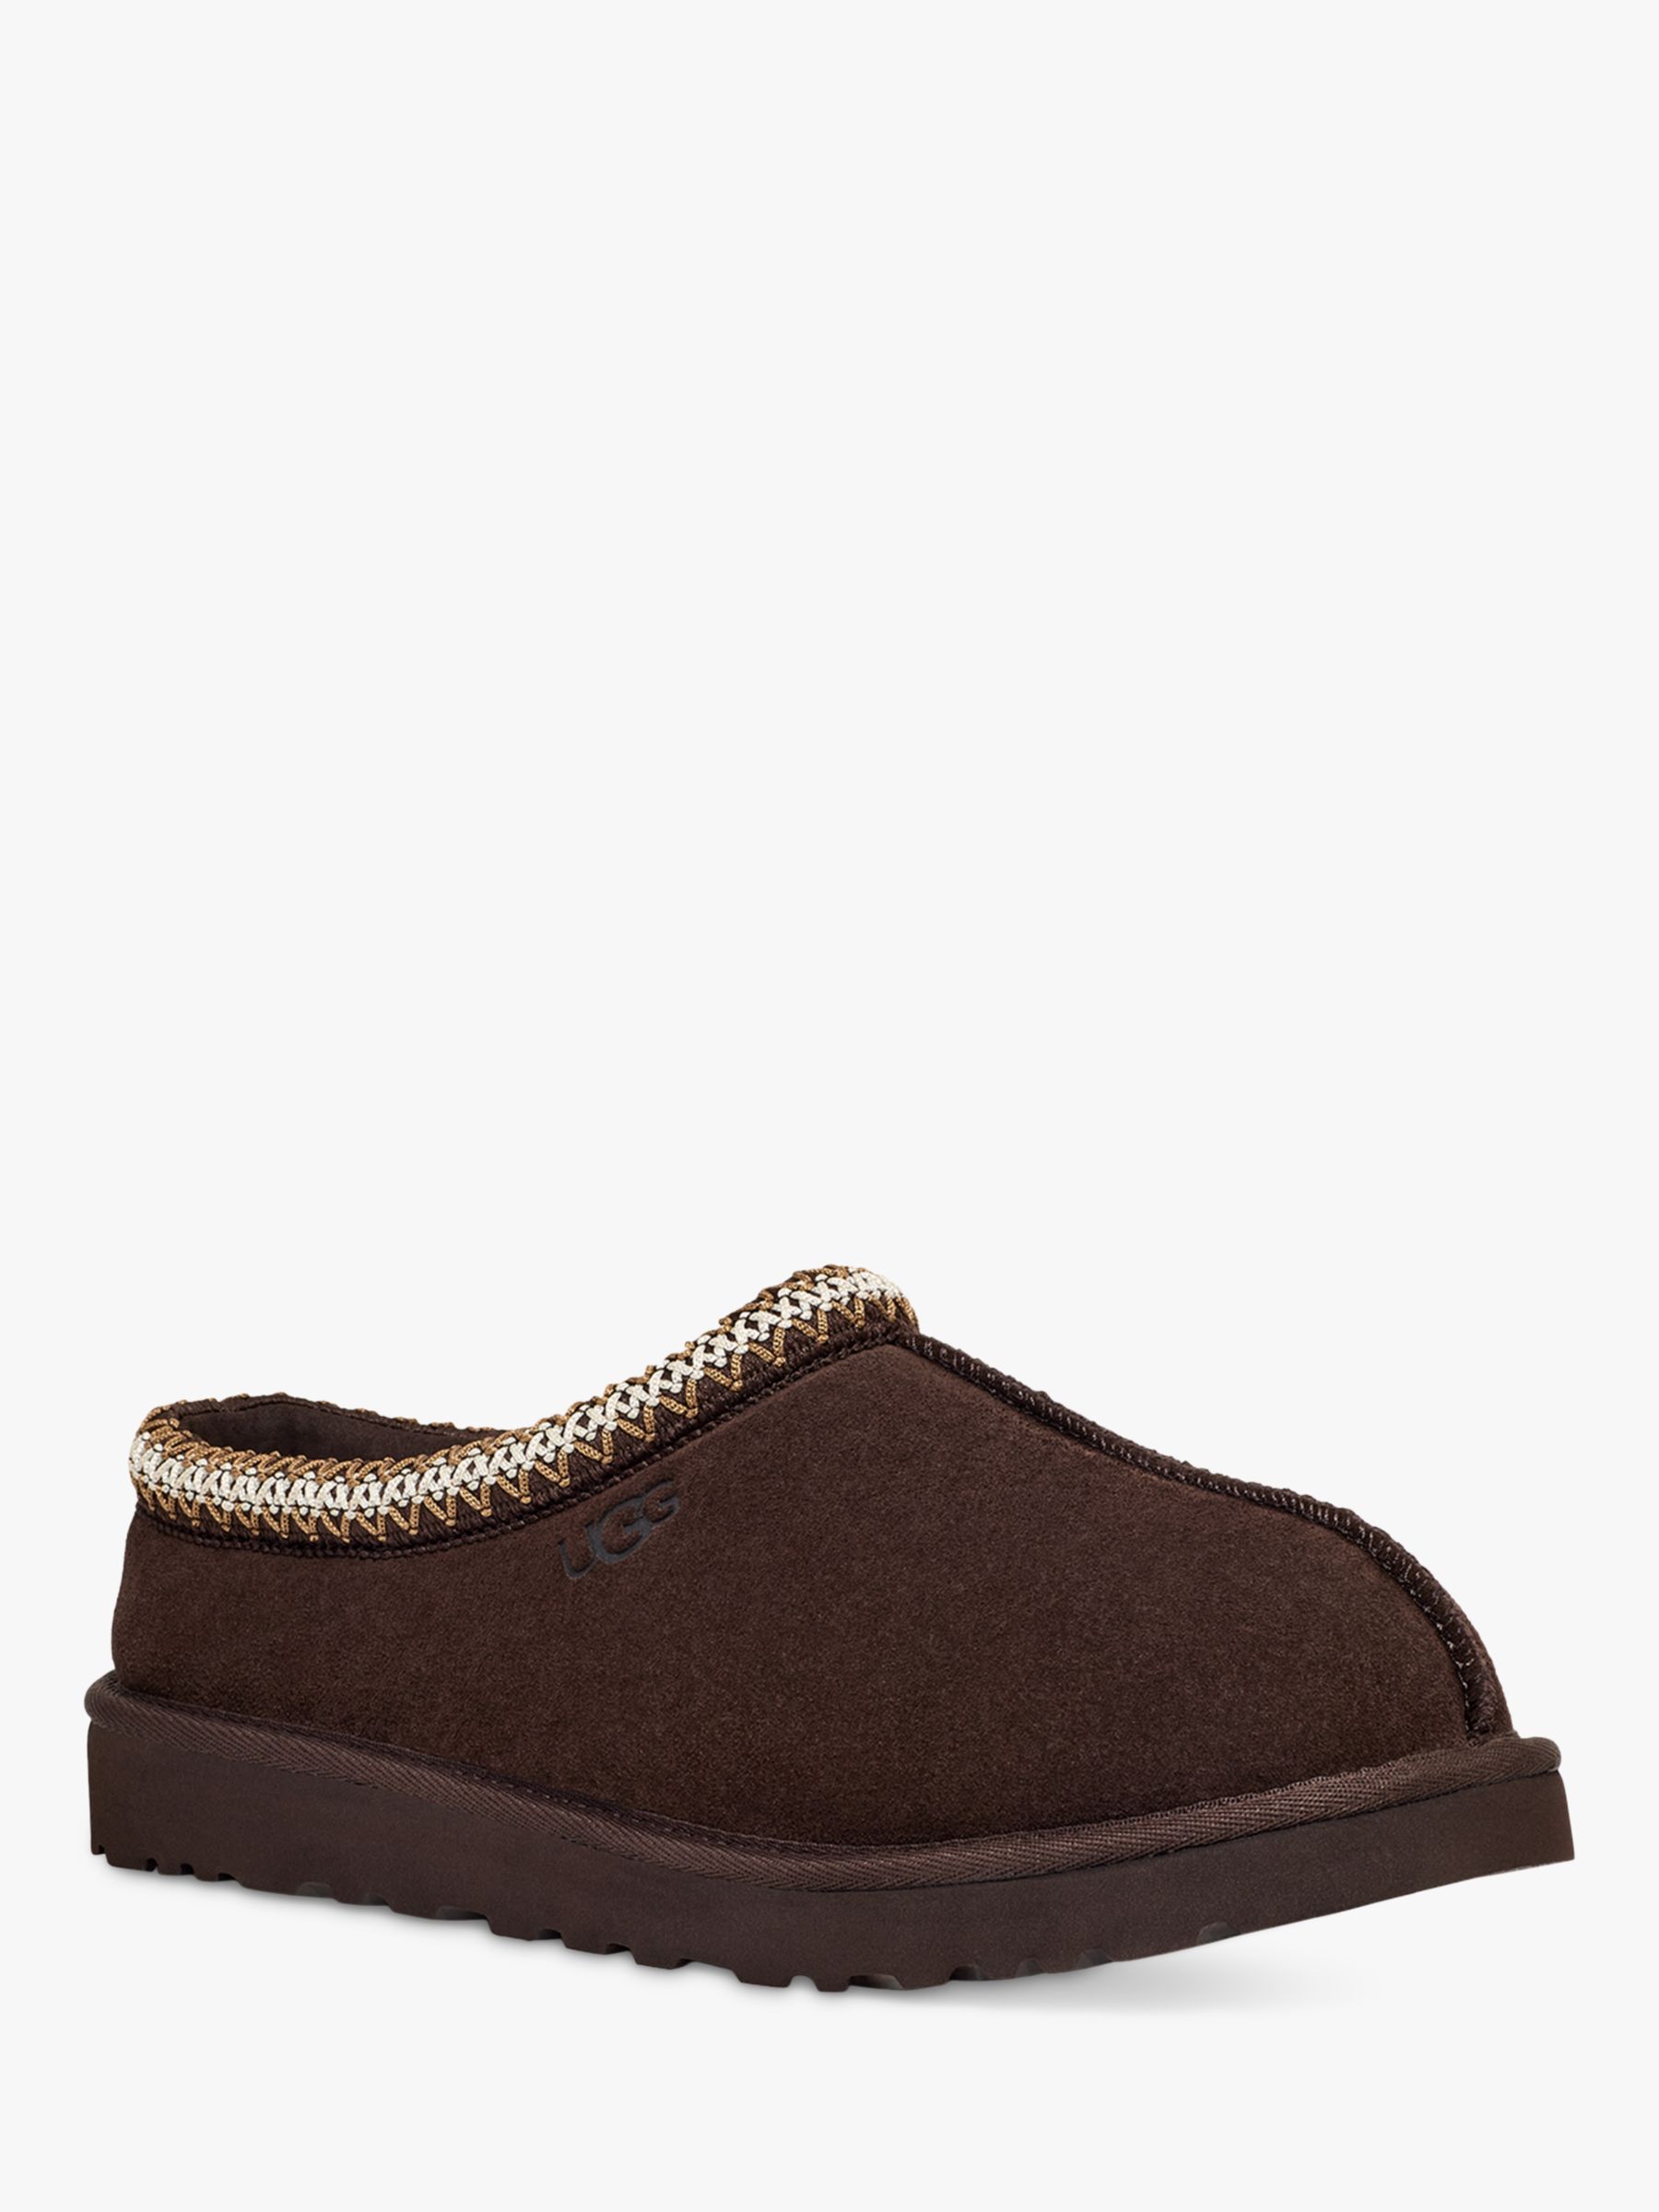 UGG Tasman Suede Slippers, Dusted Cocoa at John Lewis & Partners